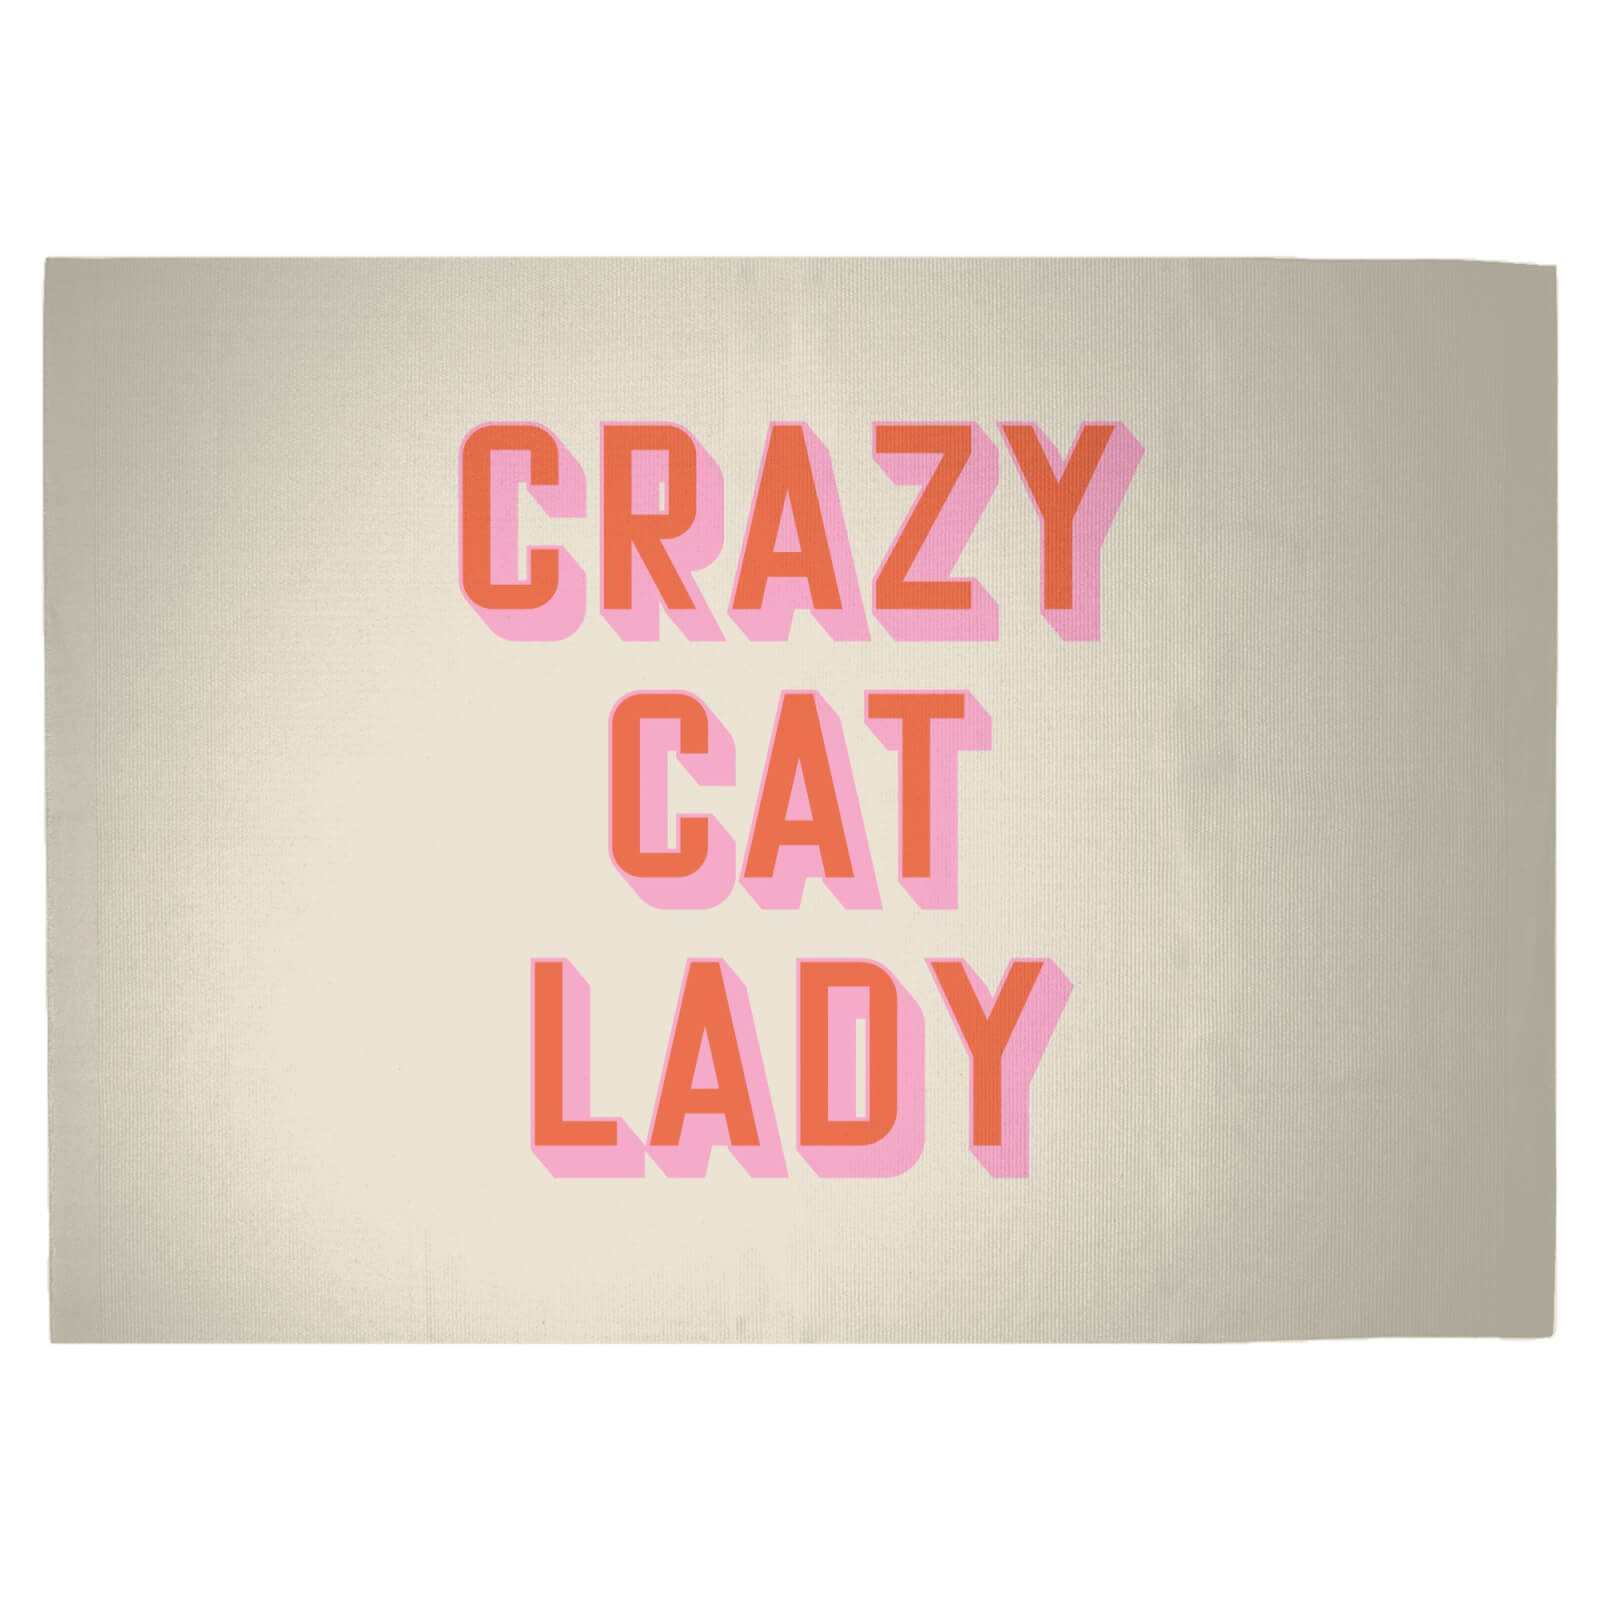 Crazy Cat Lady Woven Rug - Large